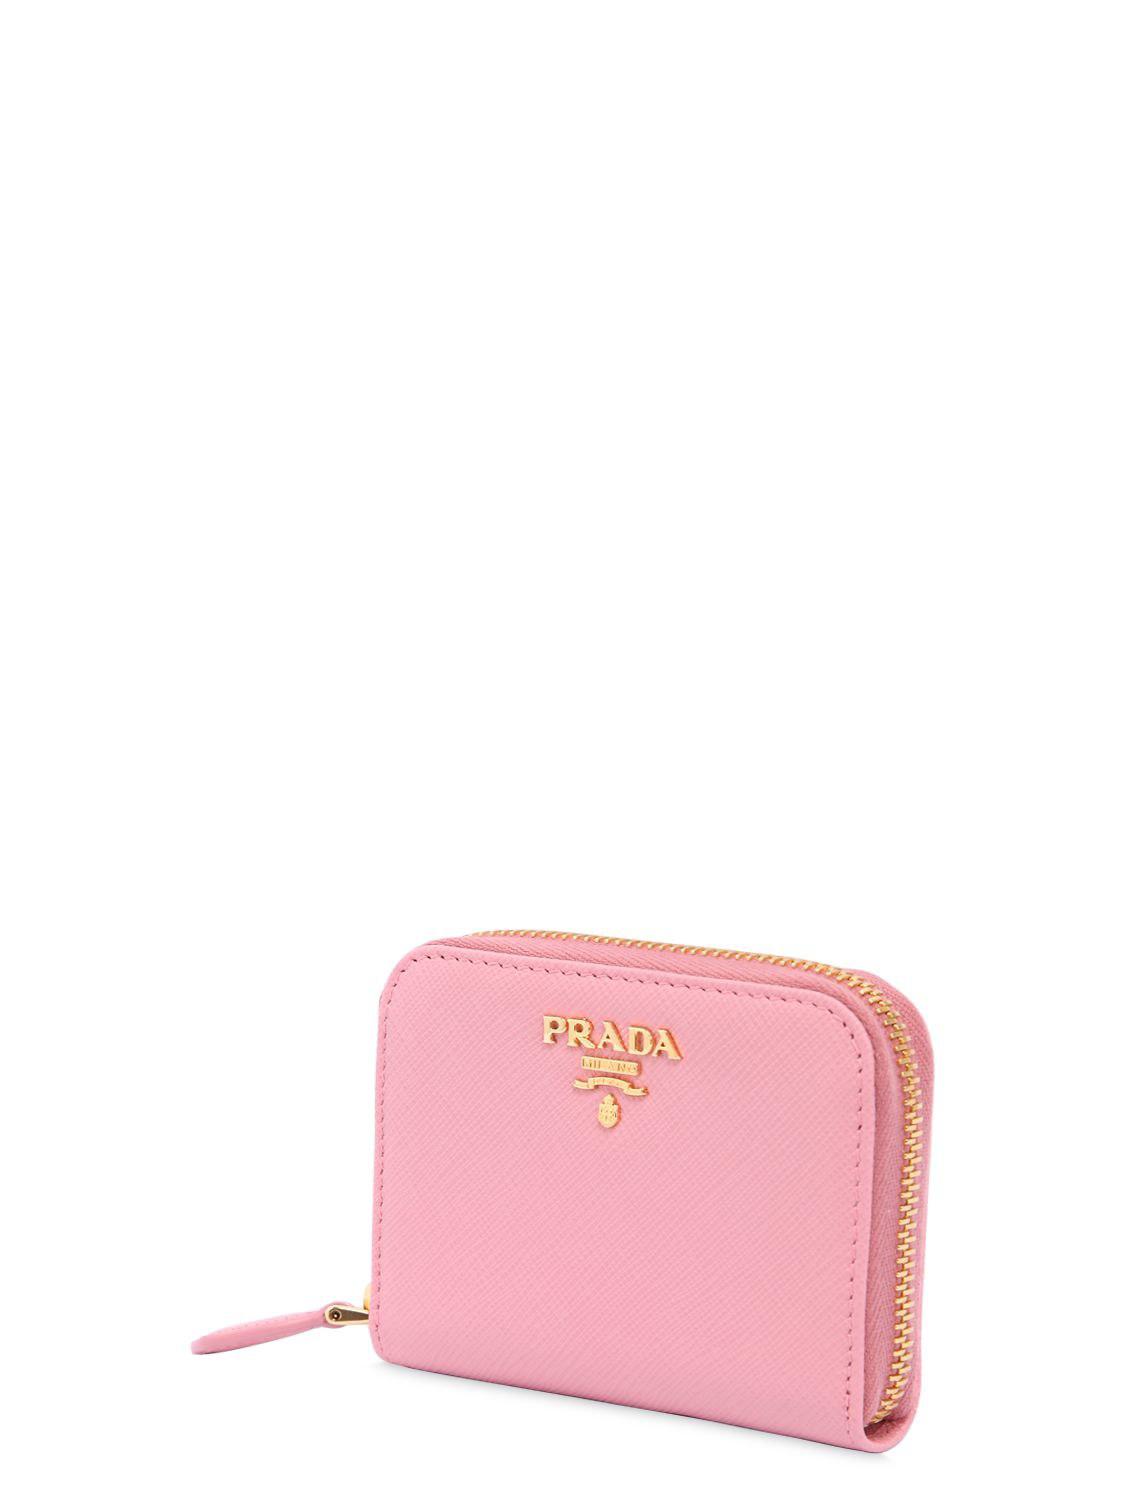 Prada Small Saffiano Leather Zip Coin Purse in Pink | Lyst